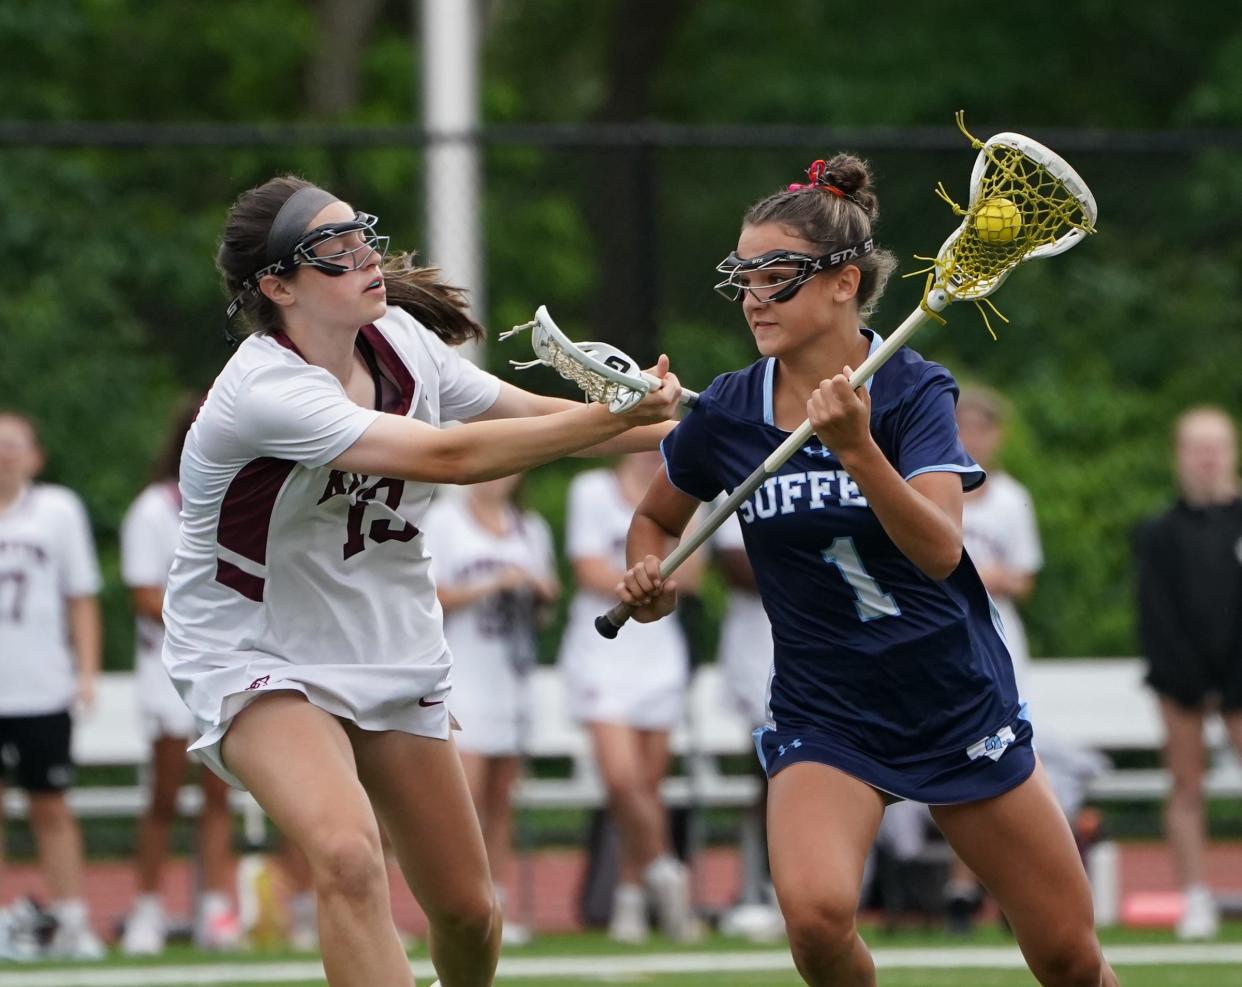 Suffern's Michaela Fay (1) works against Kingston's Alexandra Coffey (13) in the Class A state regional final girls lacrosse game at James I. O'Neill High School in Highland Falls on Saturday, June 3, 2023.